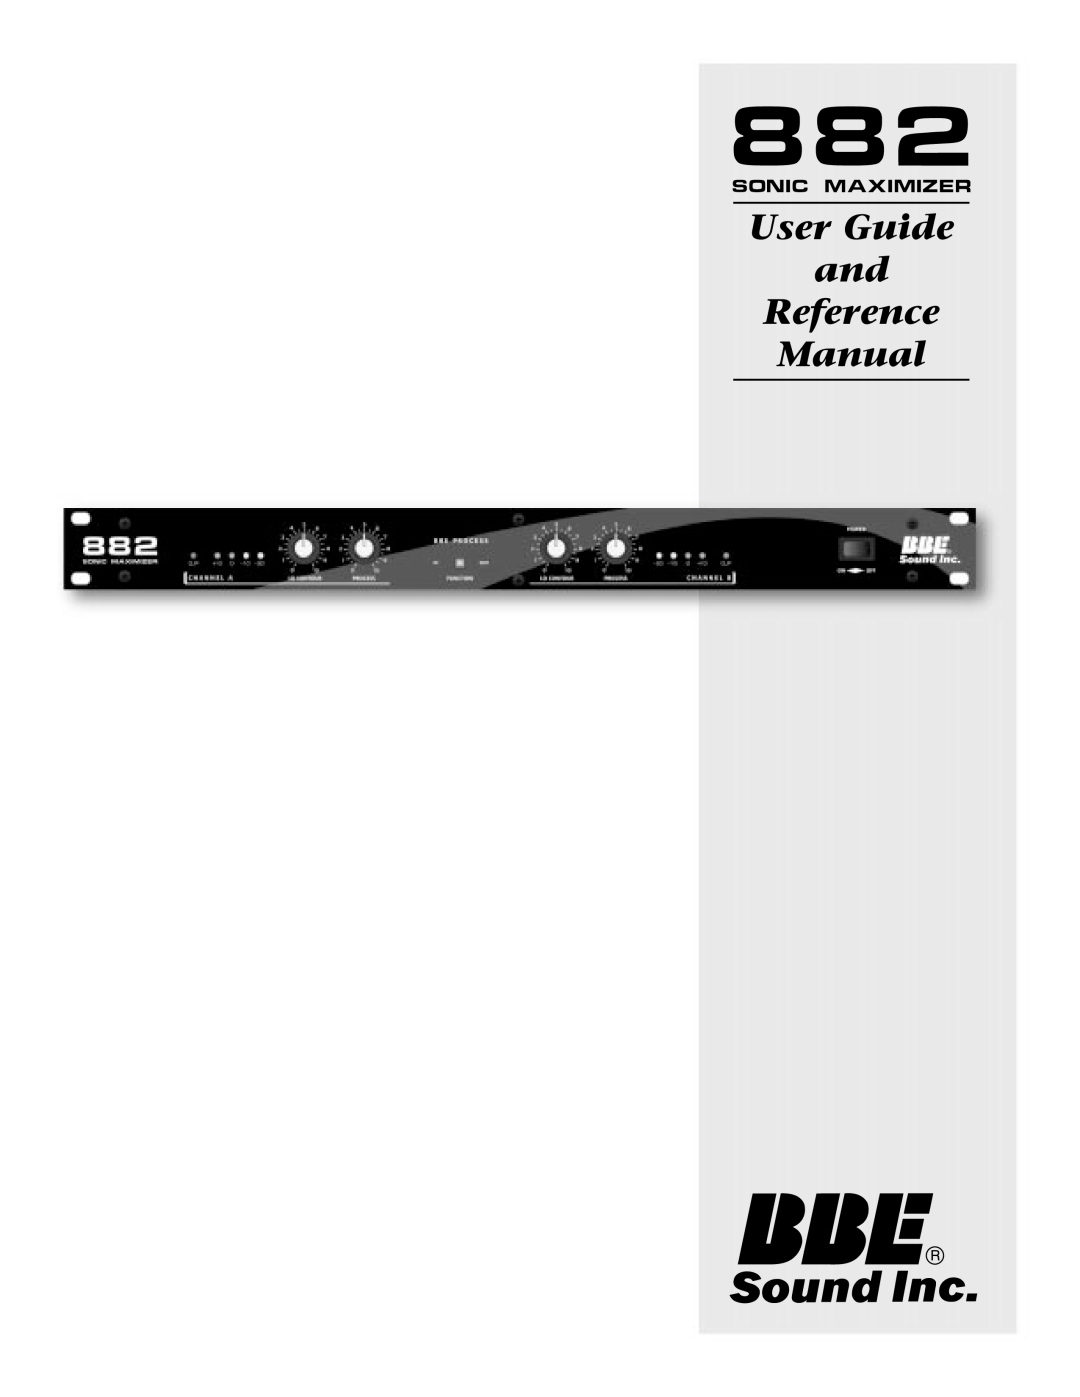 BBE BBE 882 manual User Guide and Reference Manual, Sonic Maximizer 